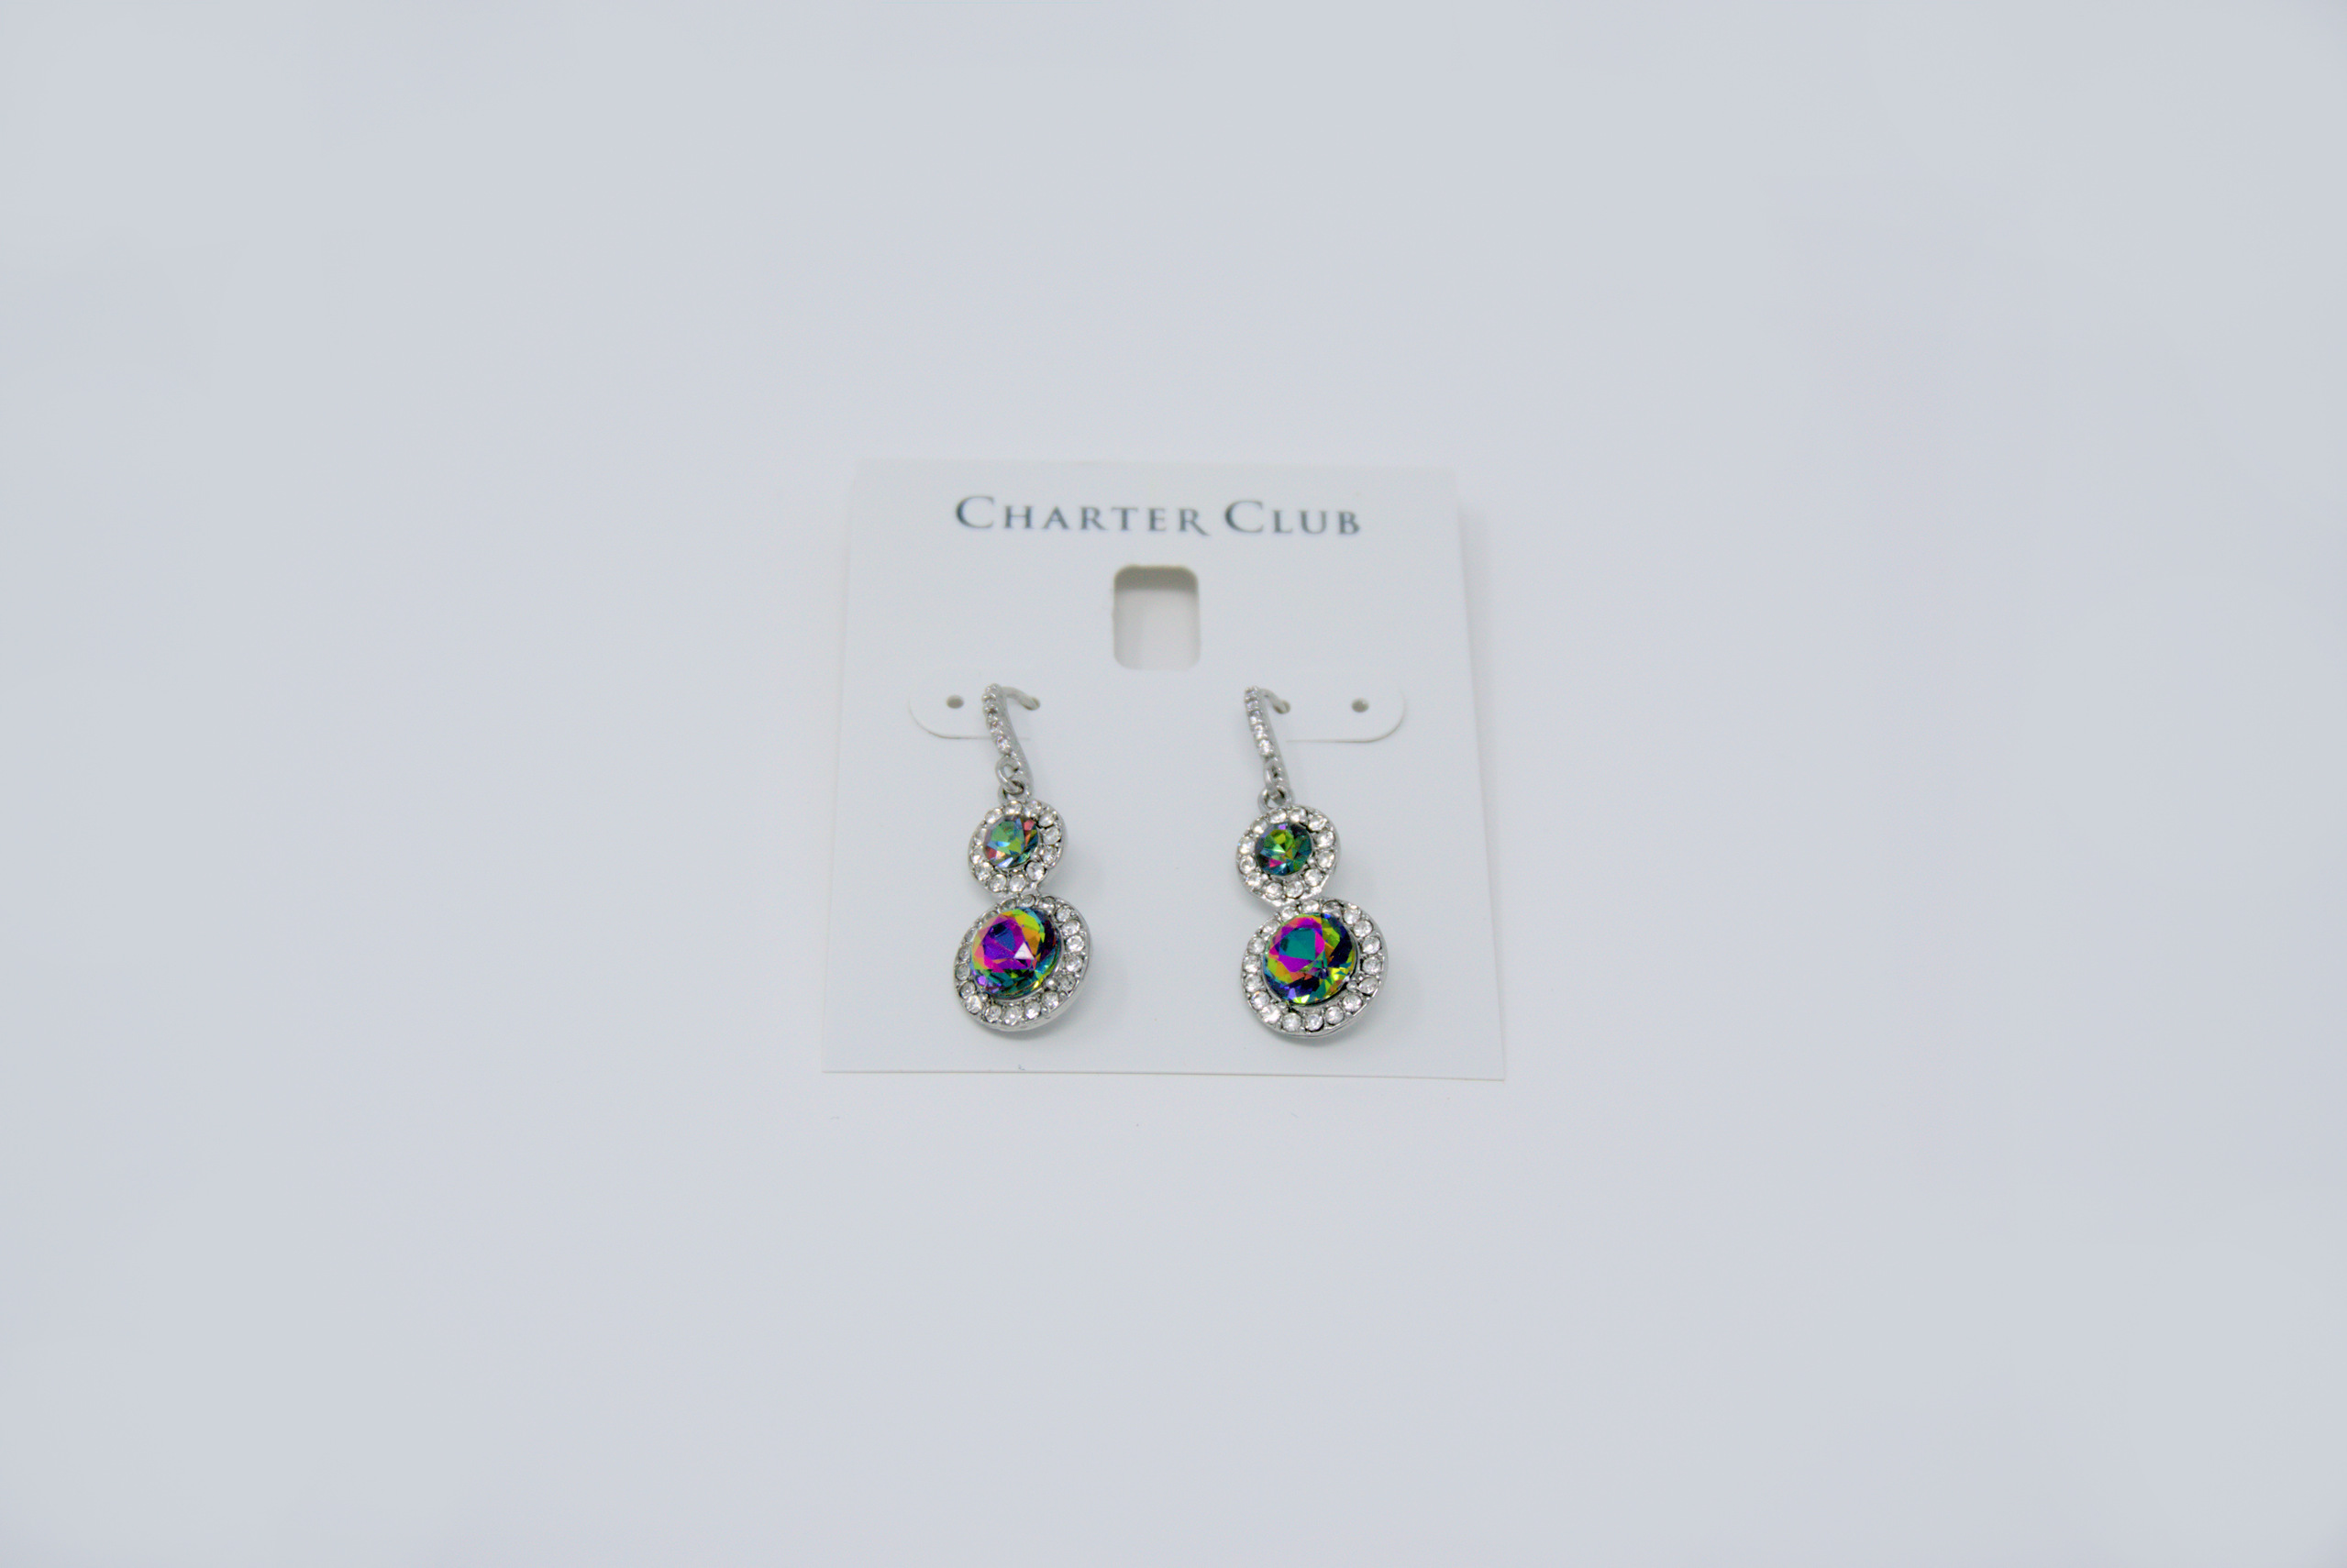 Charm & Lovely introduces Charter Club Silver-Tone Pave & Stone Halo Double Drop Earrings